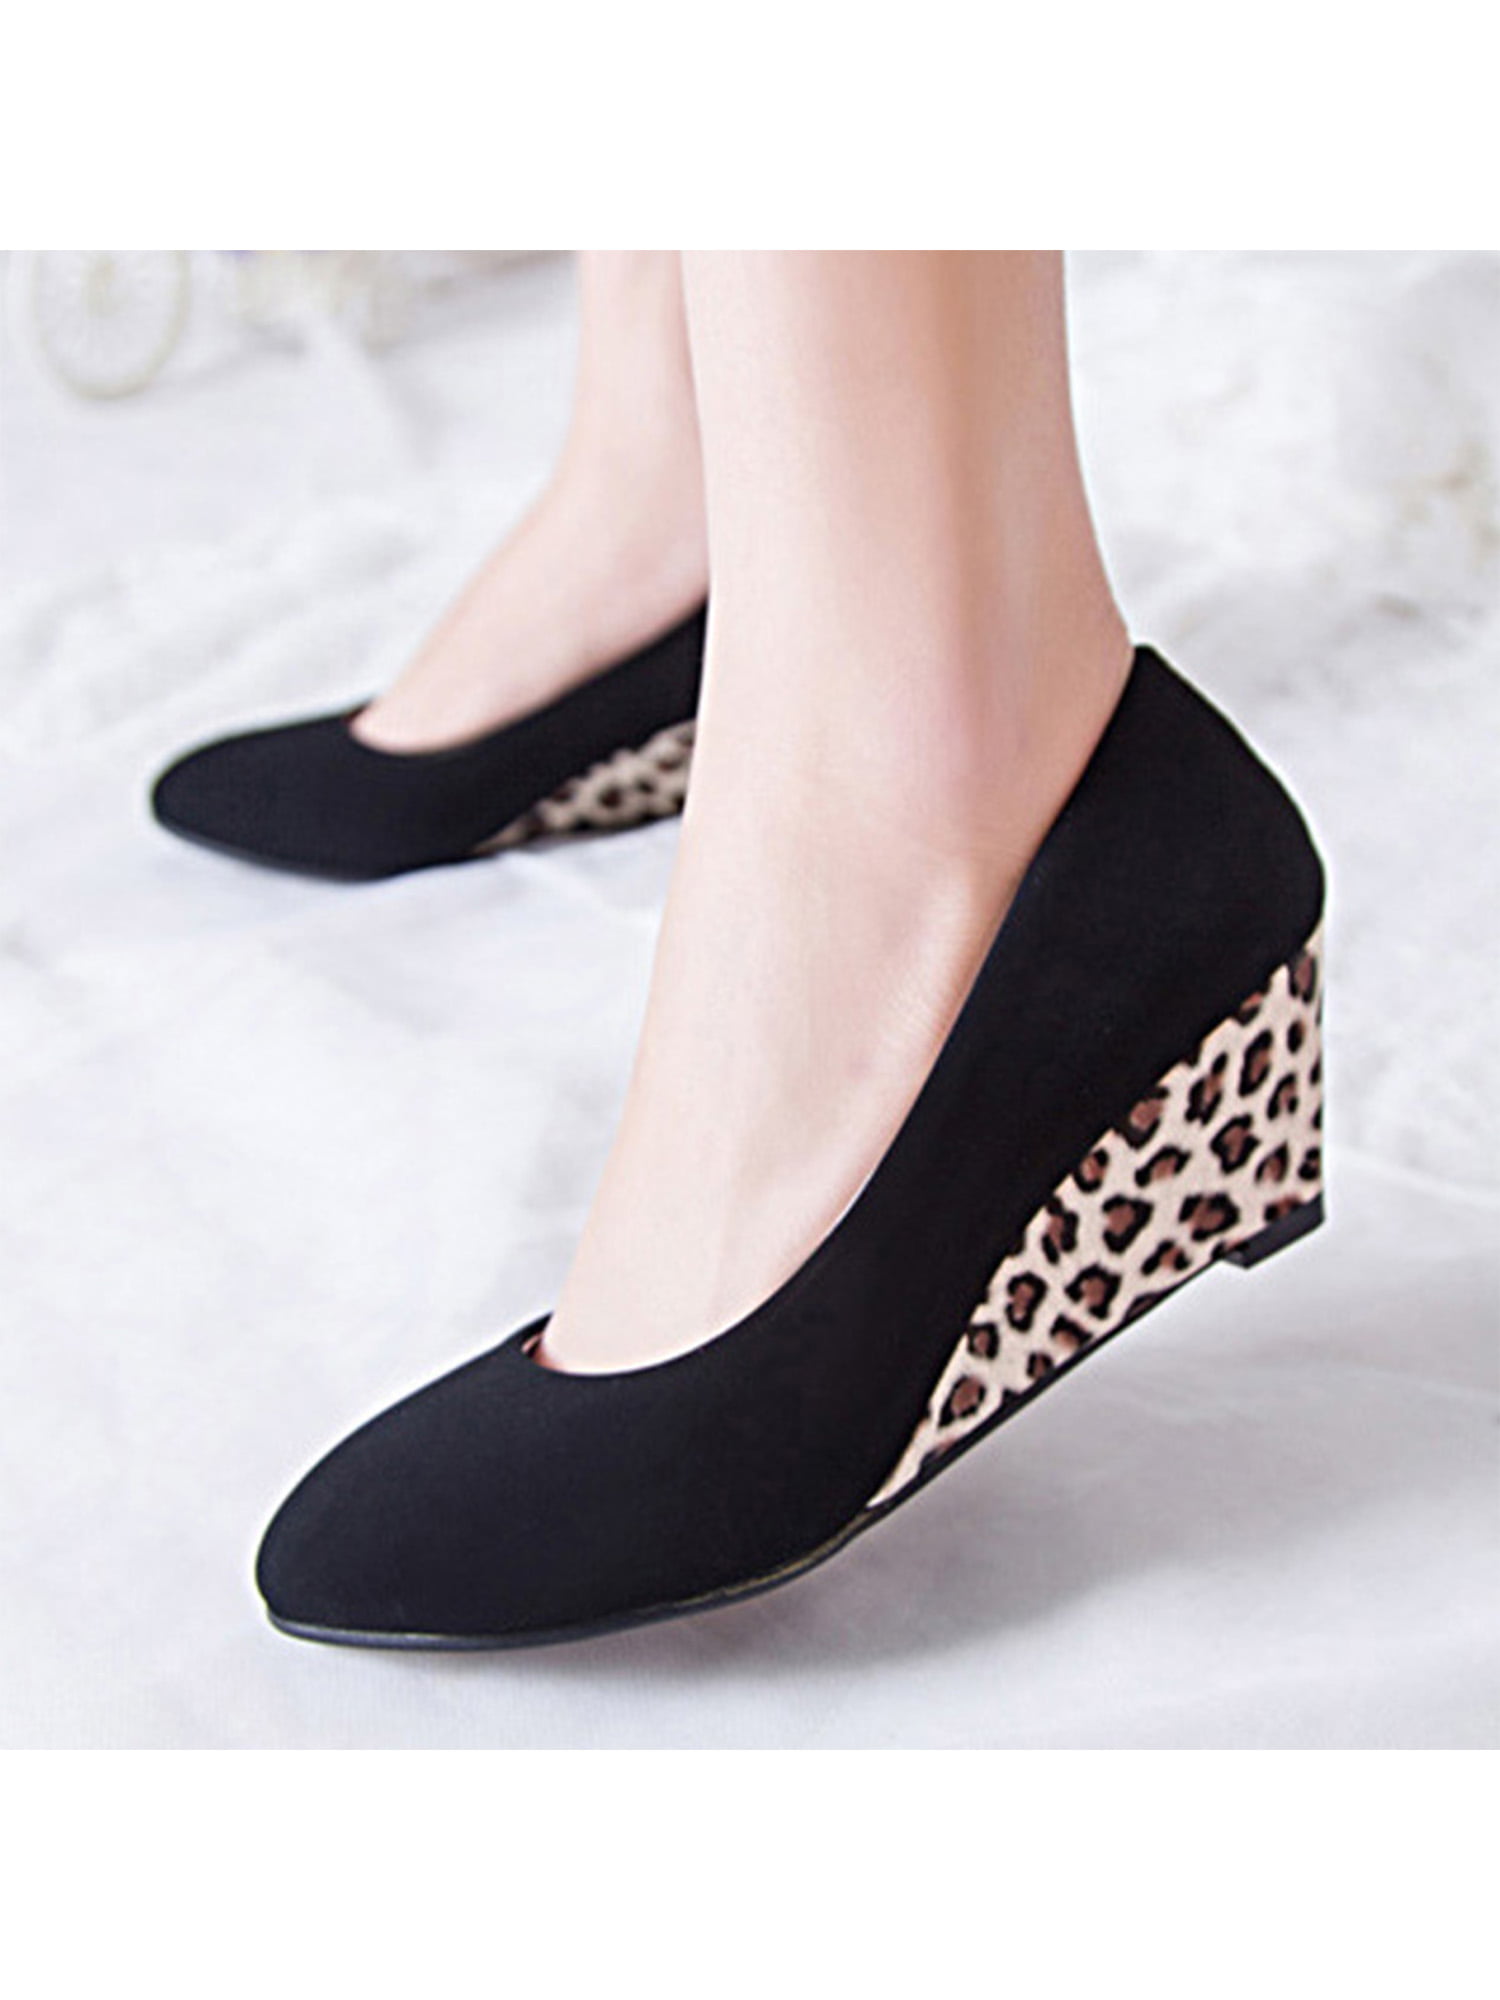 Womens Party Pumps Wedge Heels Round Toe Platform Court Dating Fashion Shoes Sz 